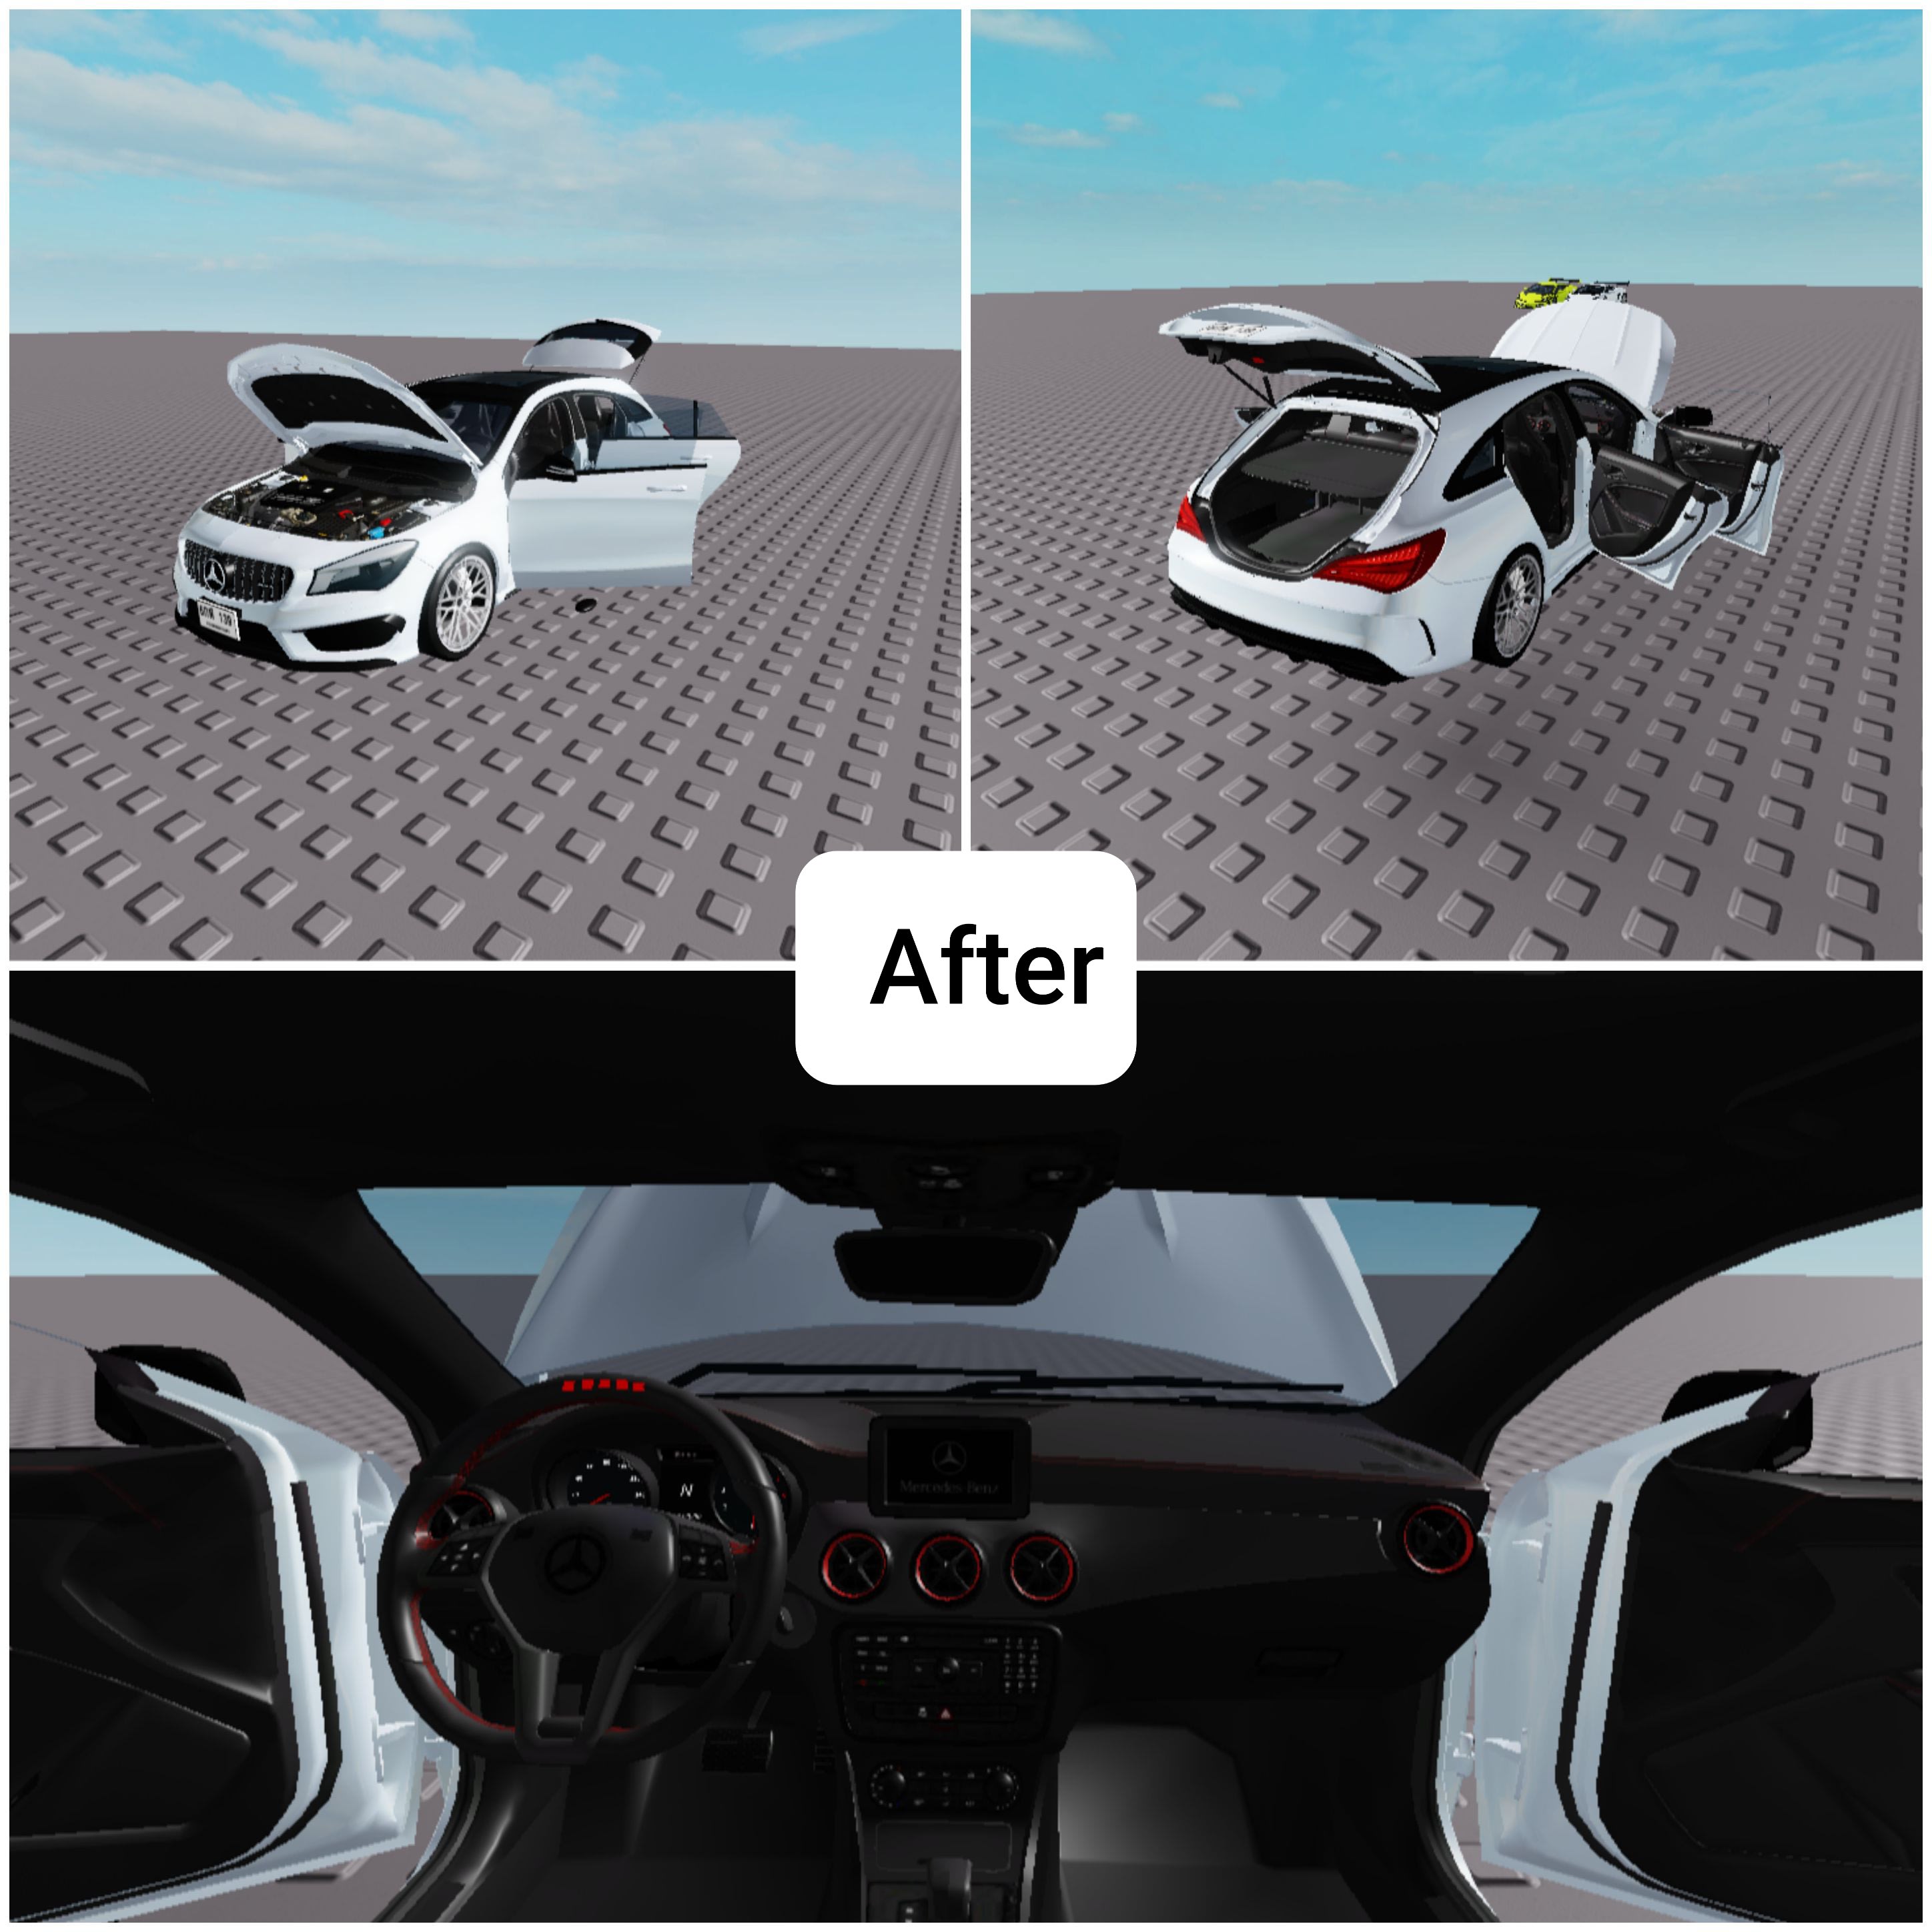 Modify Your Car Model In Roblox Studio With The Specifications You Desire By Sebastian Yeong - how to make a working door in roblox studio